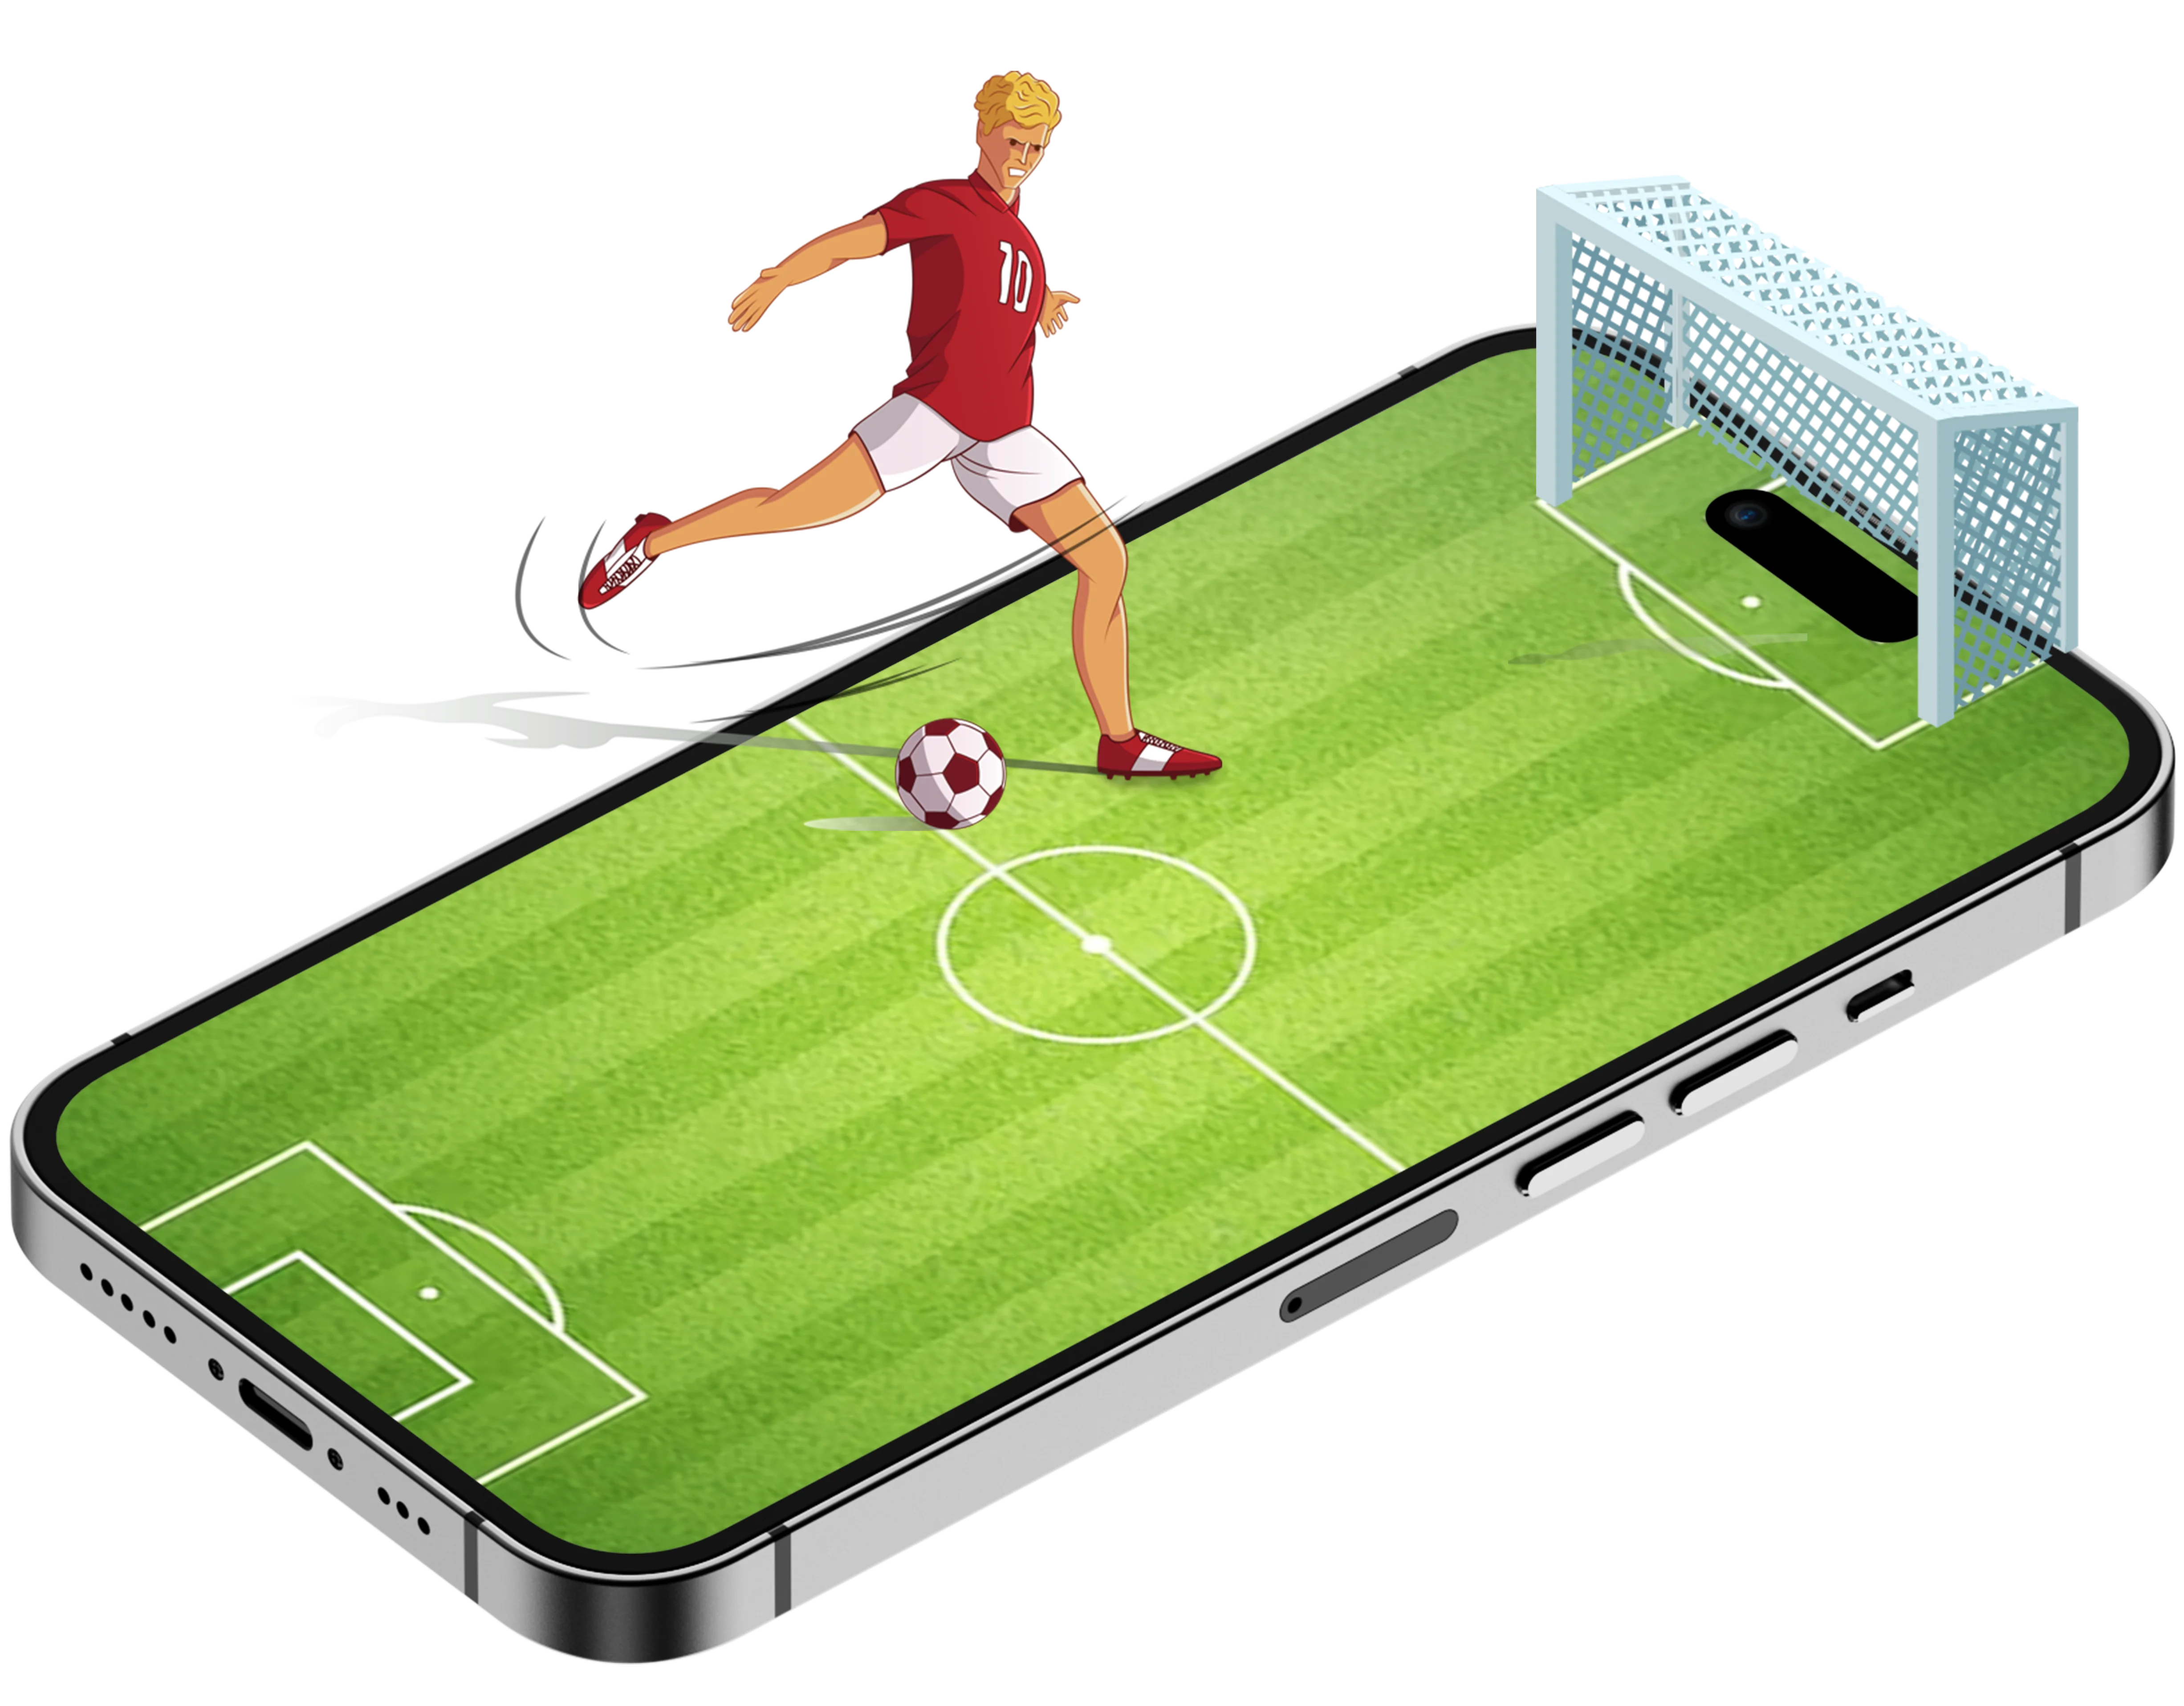 Fantasy cricket apps for iOS and Android - Sciflare